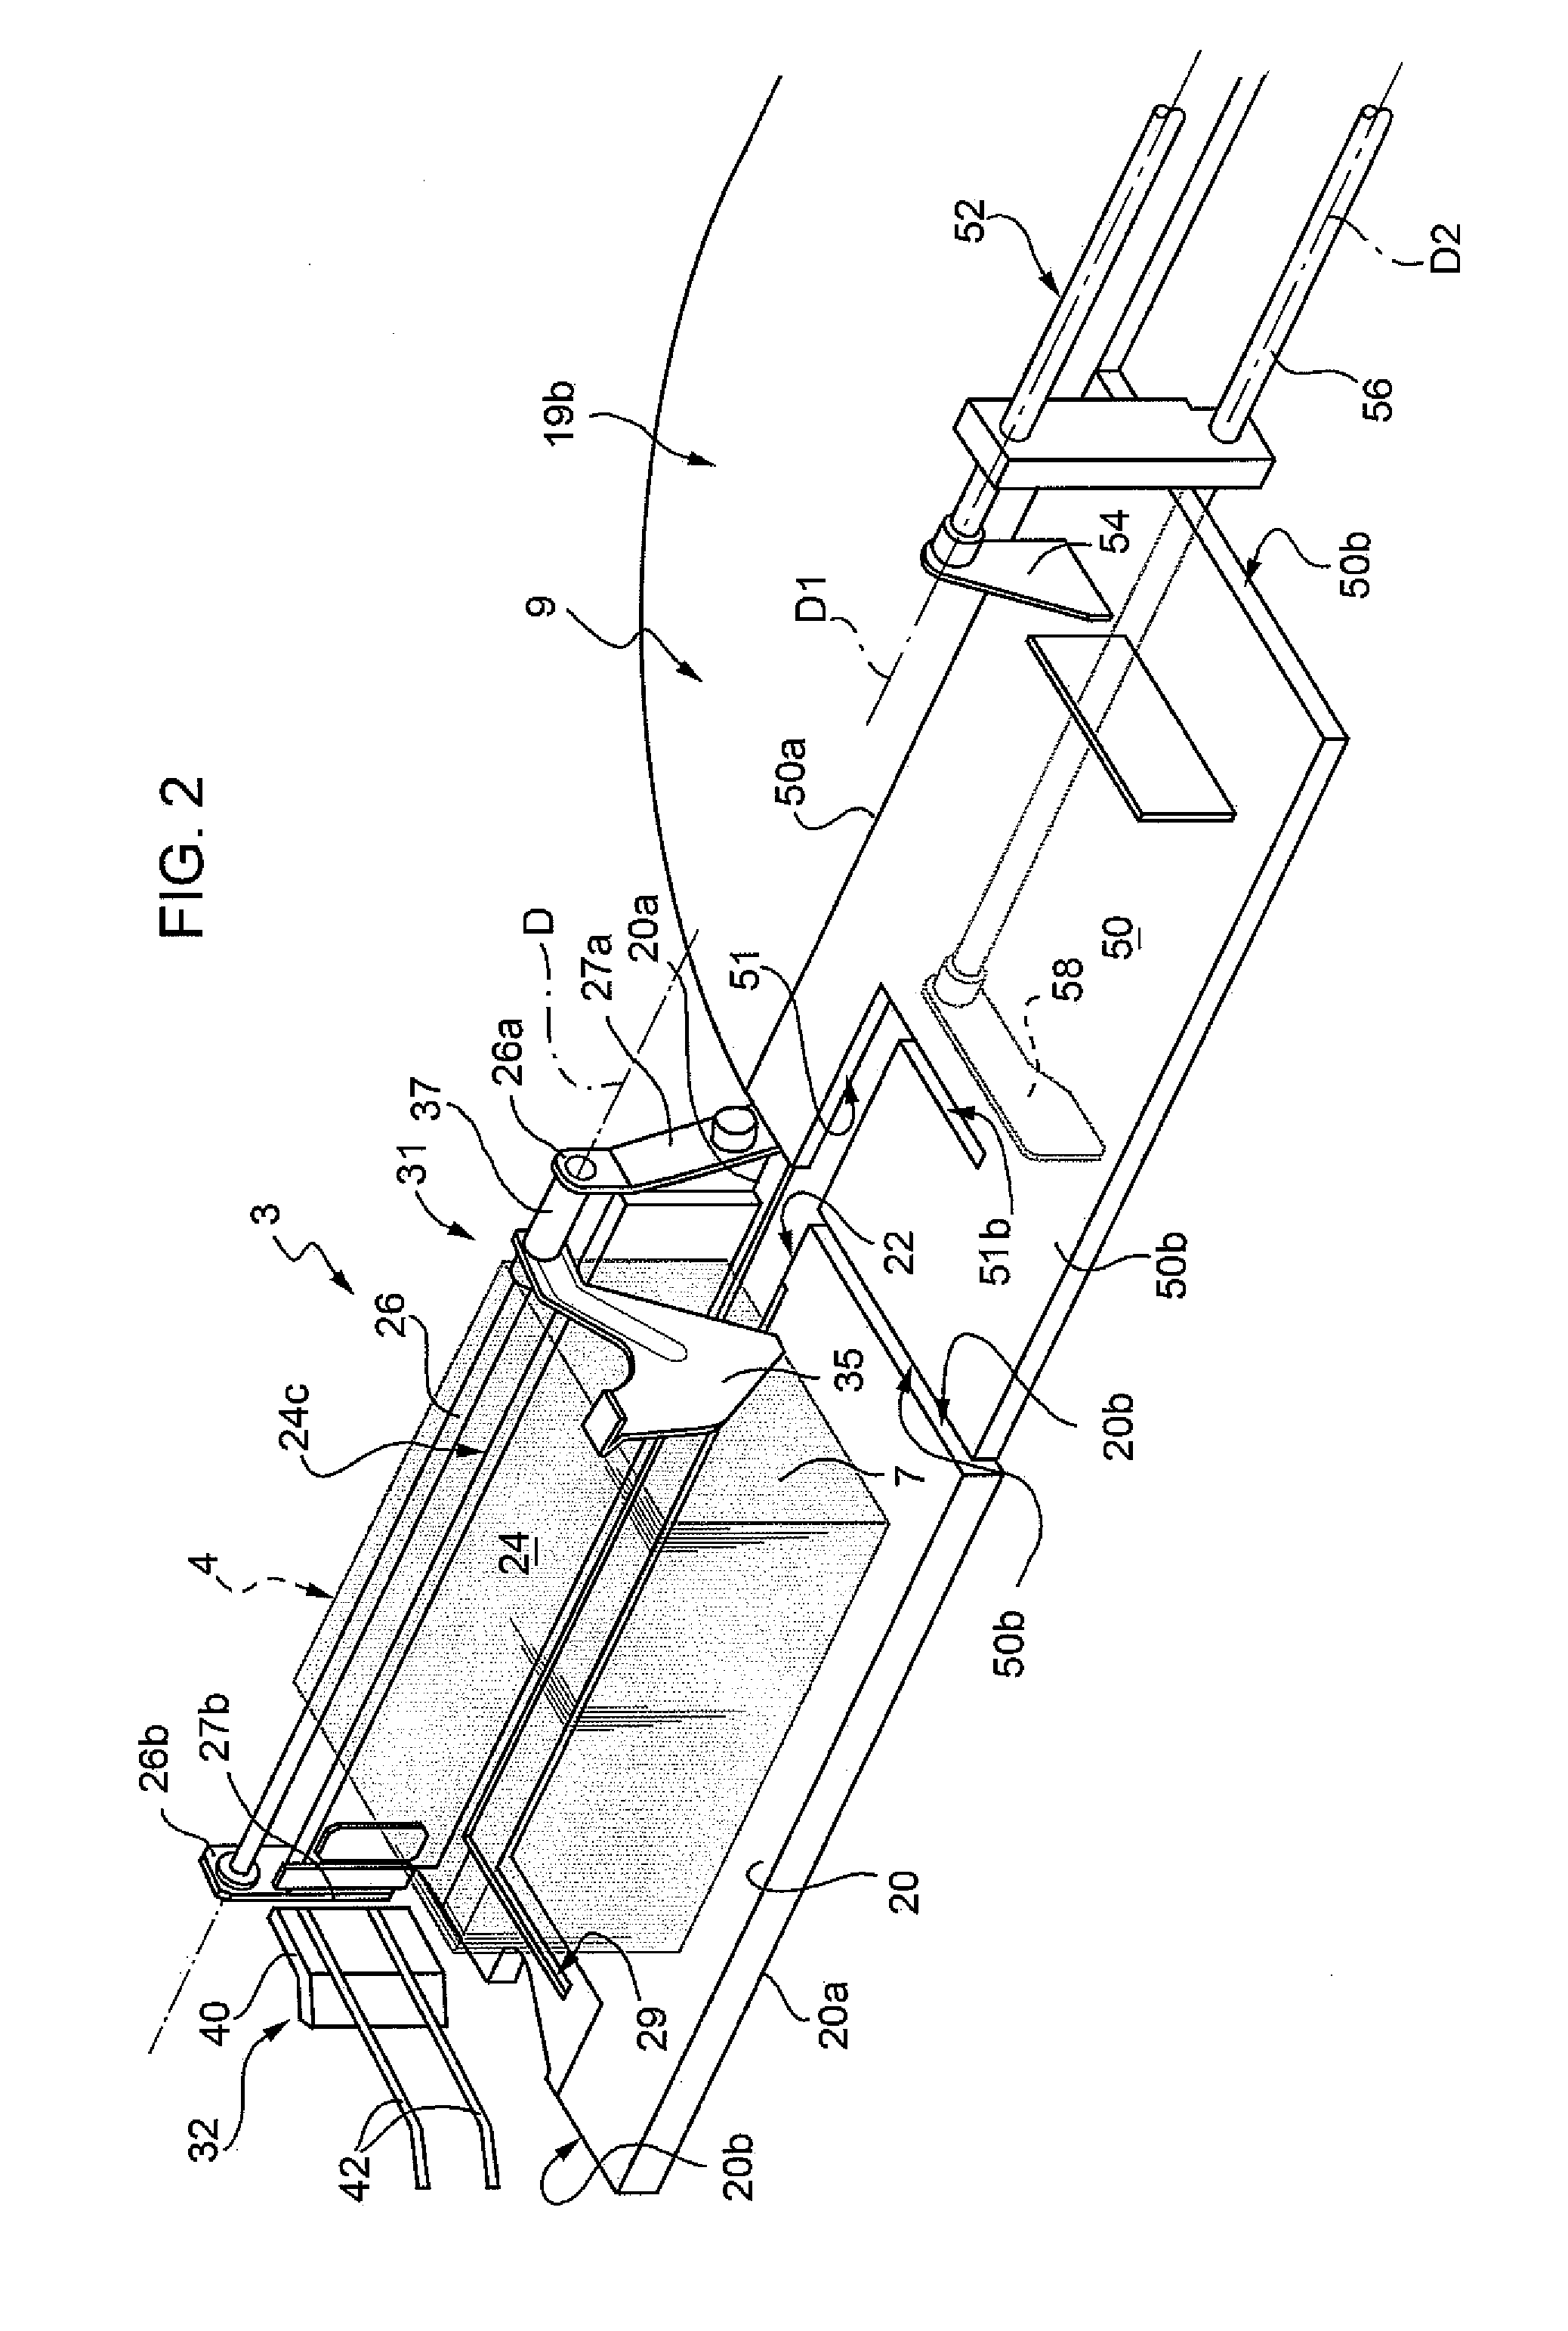 Device for processing mail items in bundles